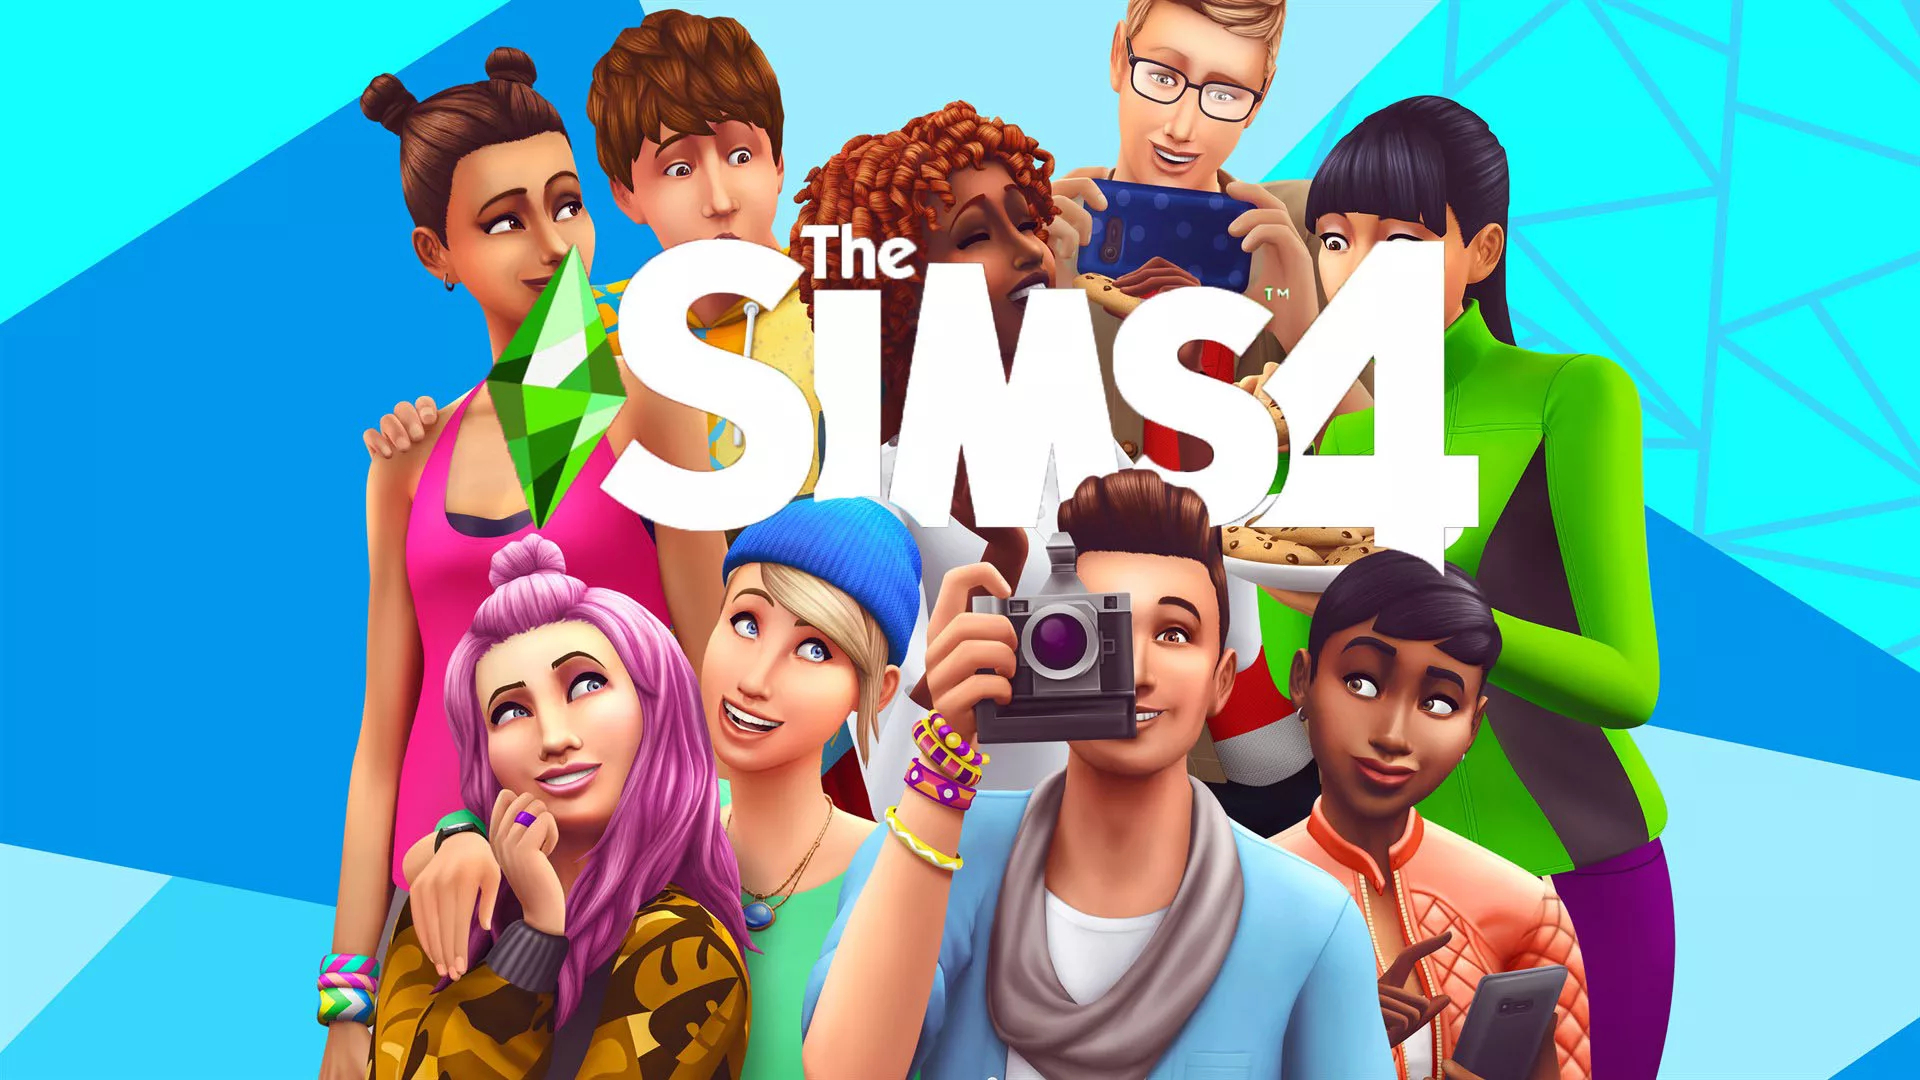 The sims 4 steam price фото 5